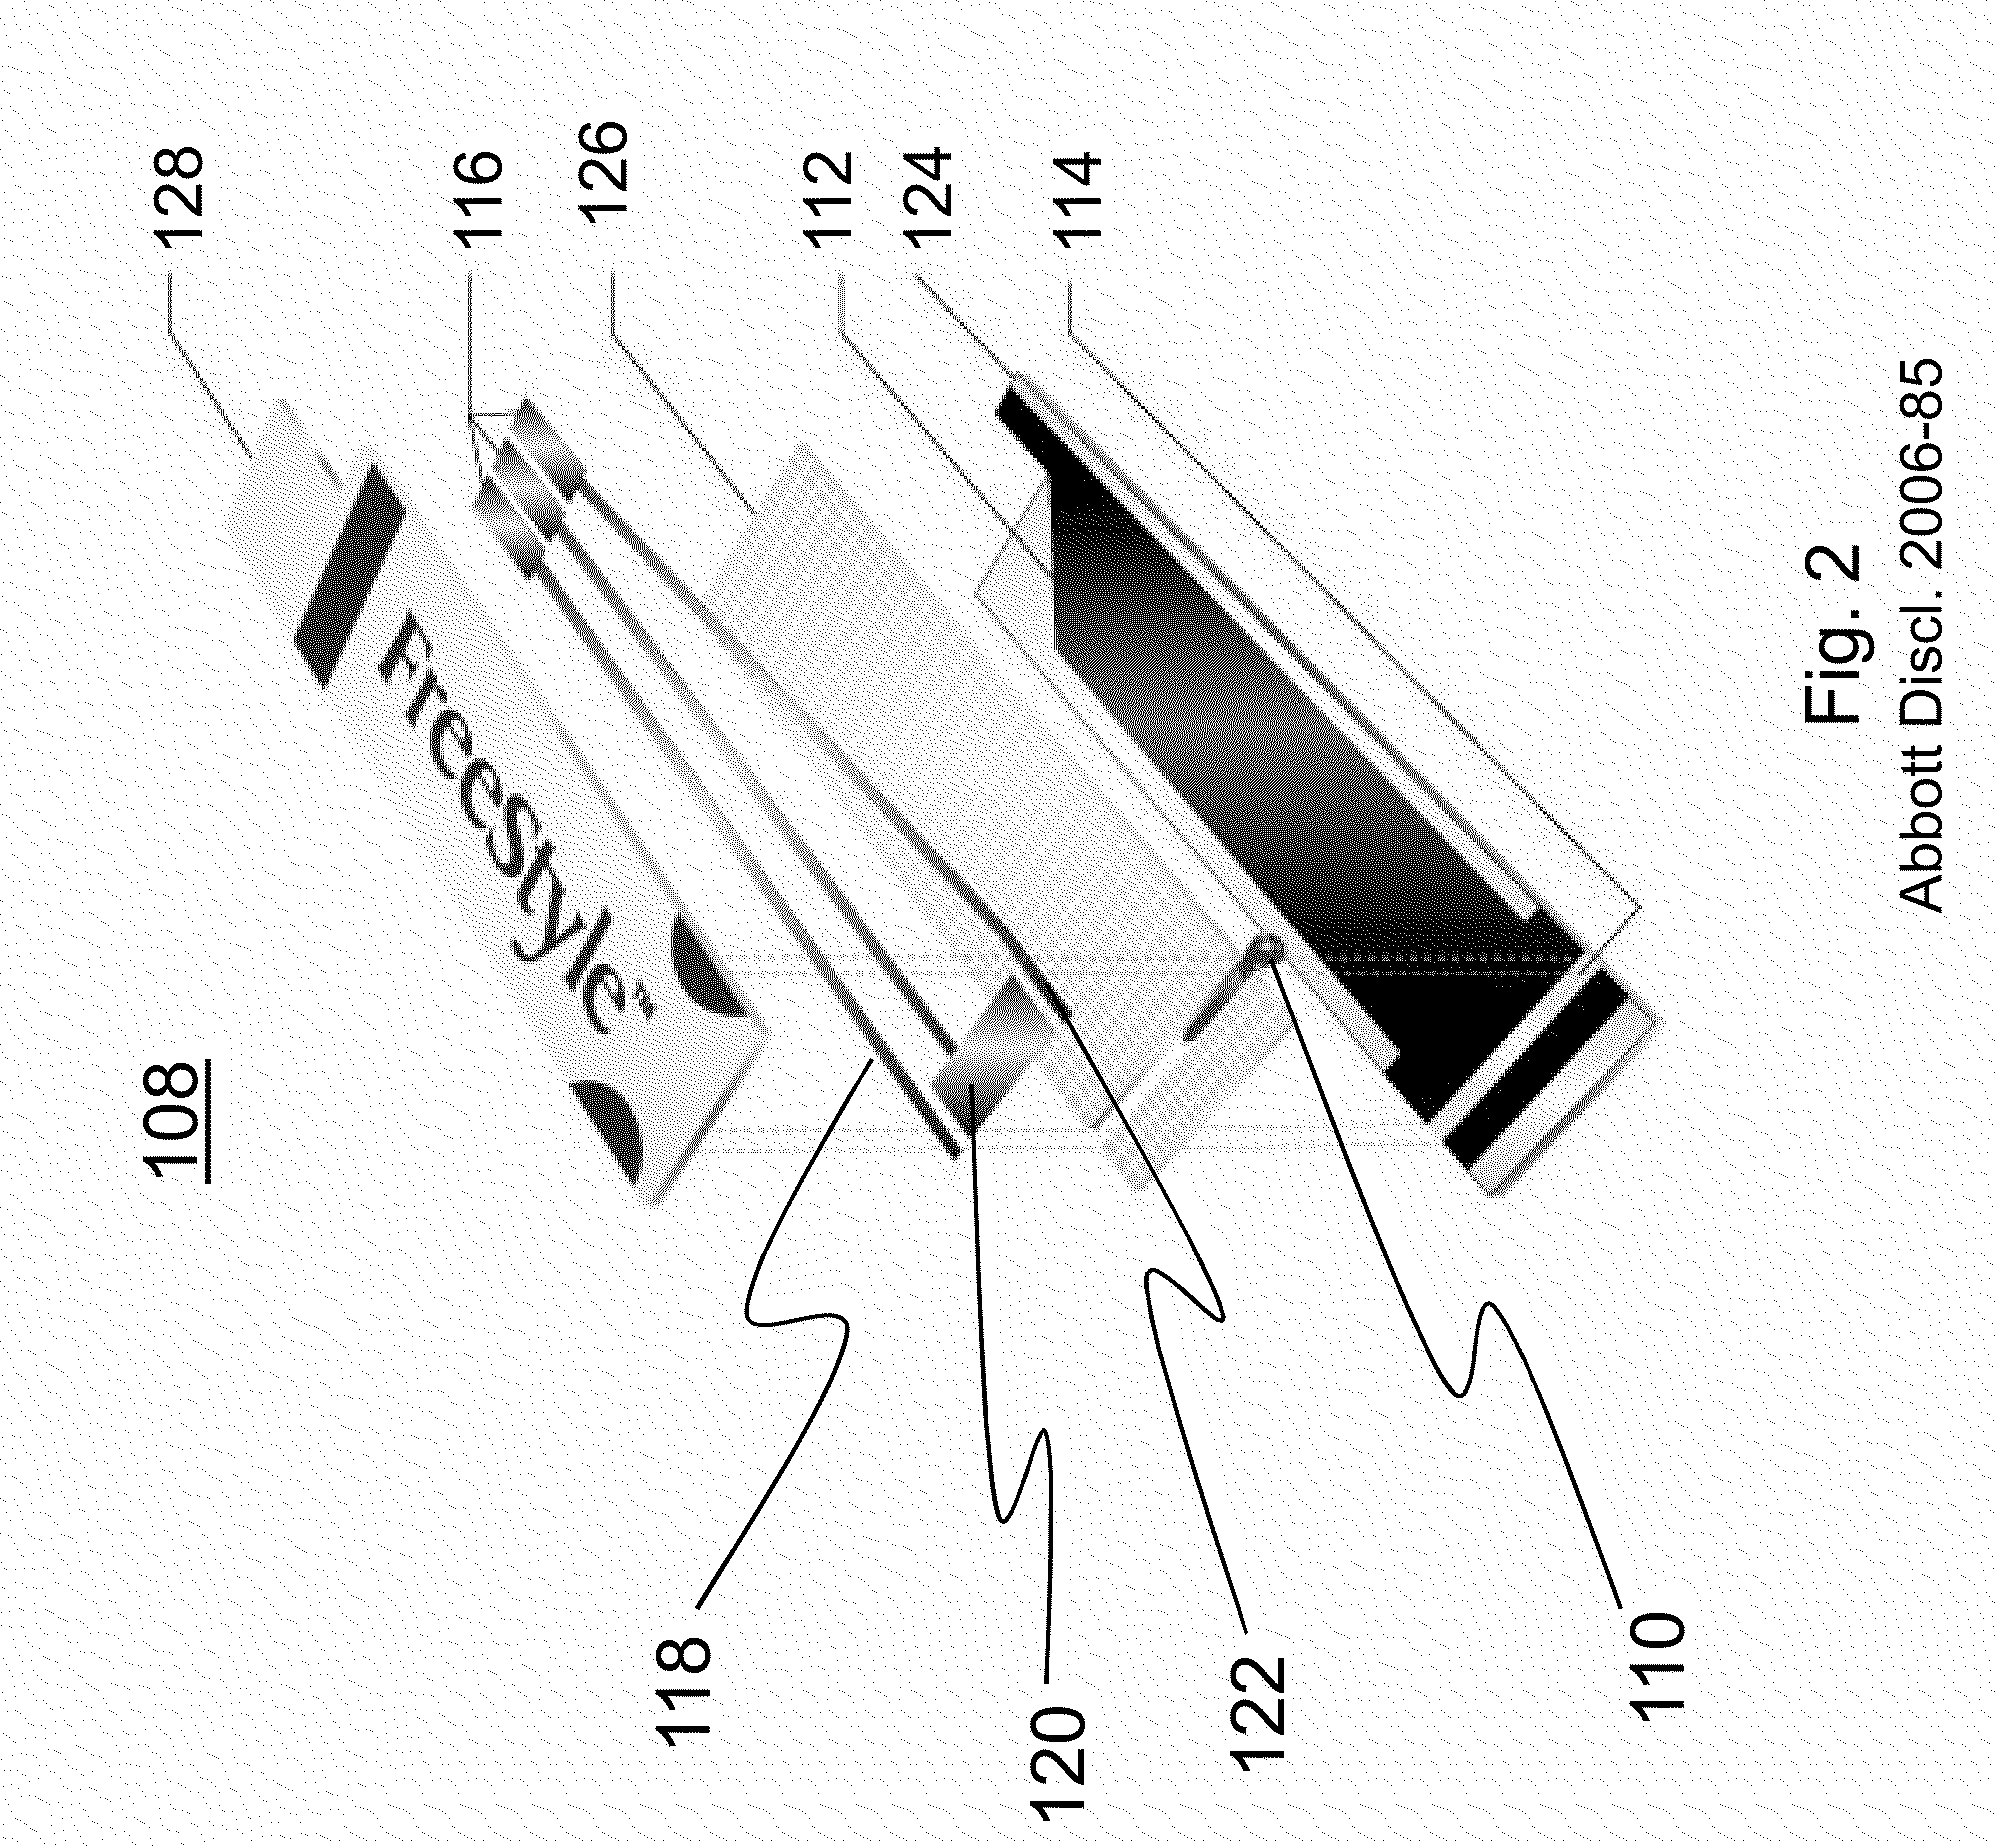 Analyte determination methods and devices